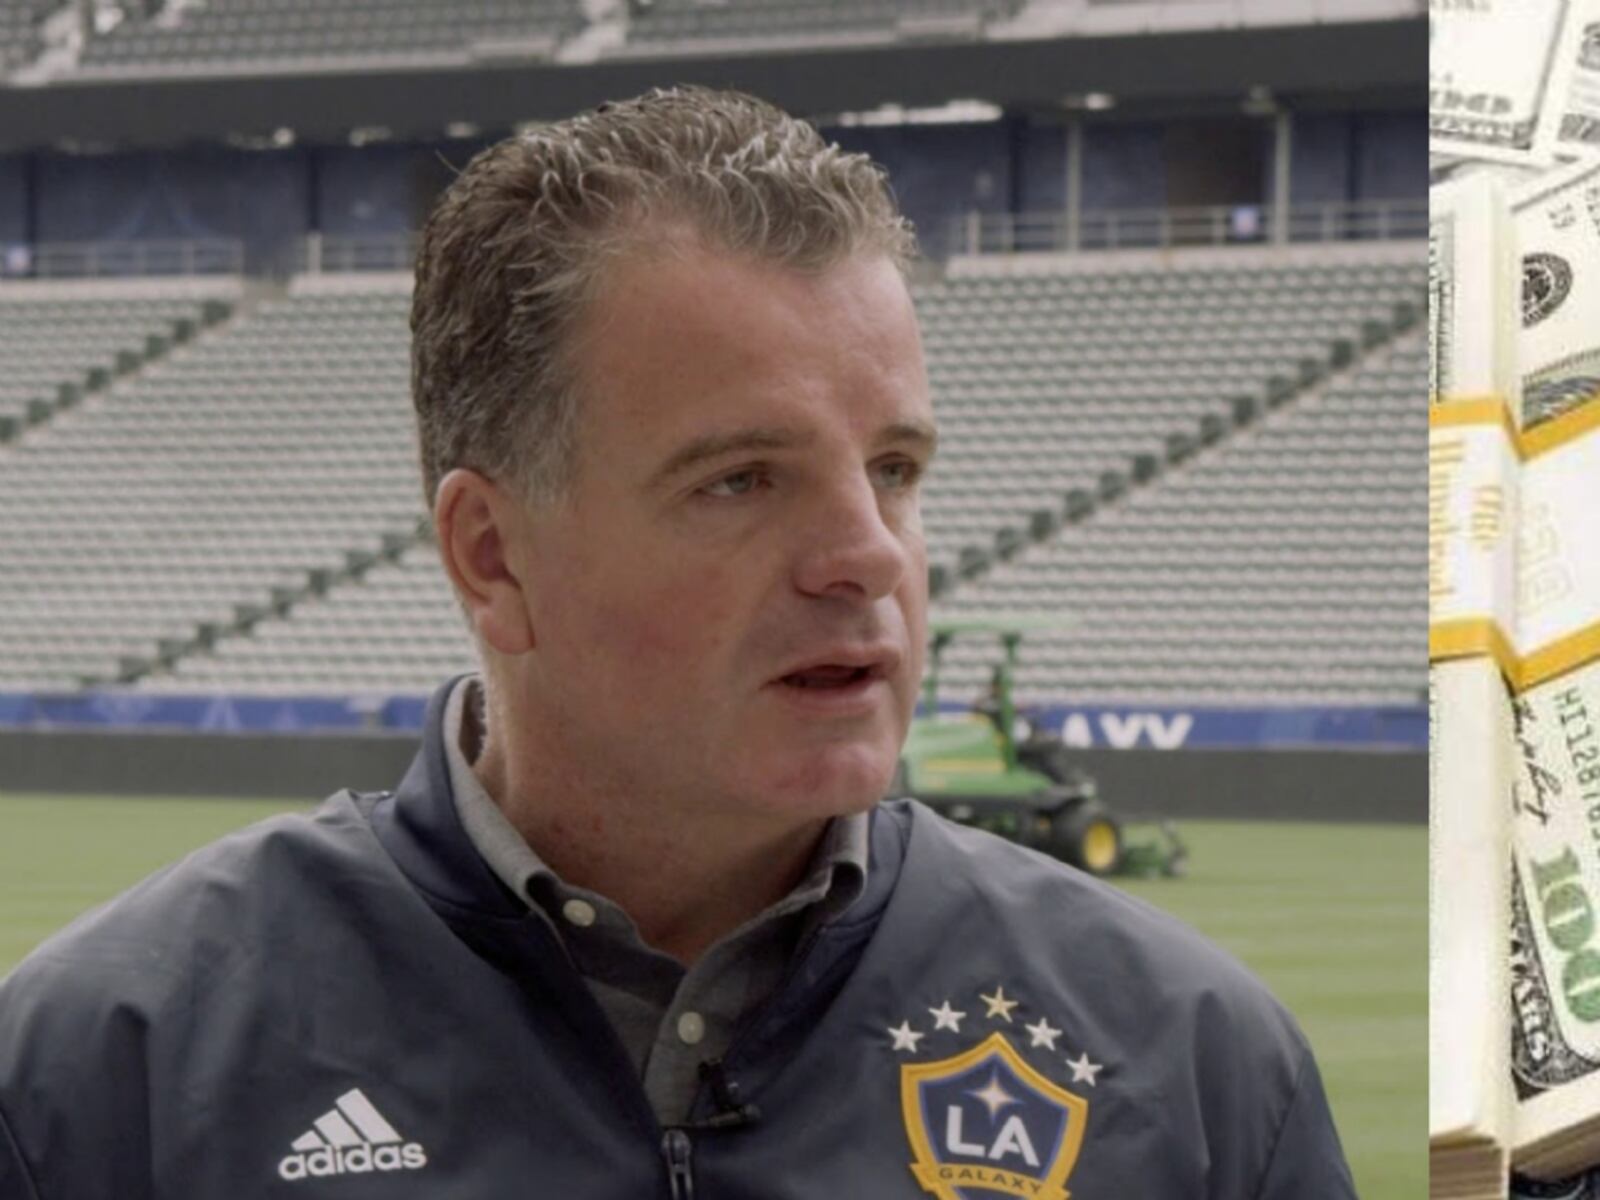 The only and millionaire reason the LA Galaxy can't cast Dennis te Kloese despite being disappointed in him.